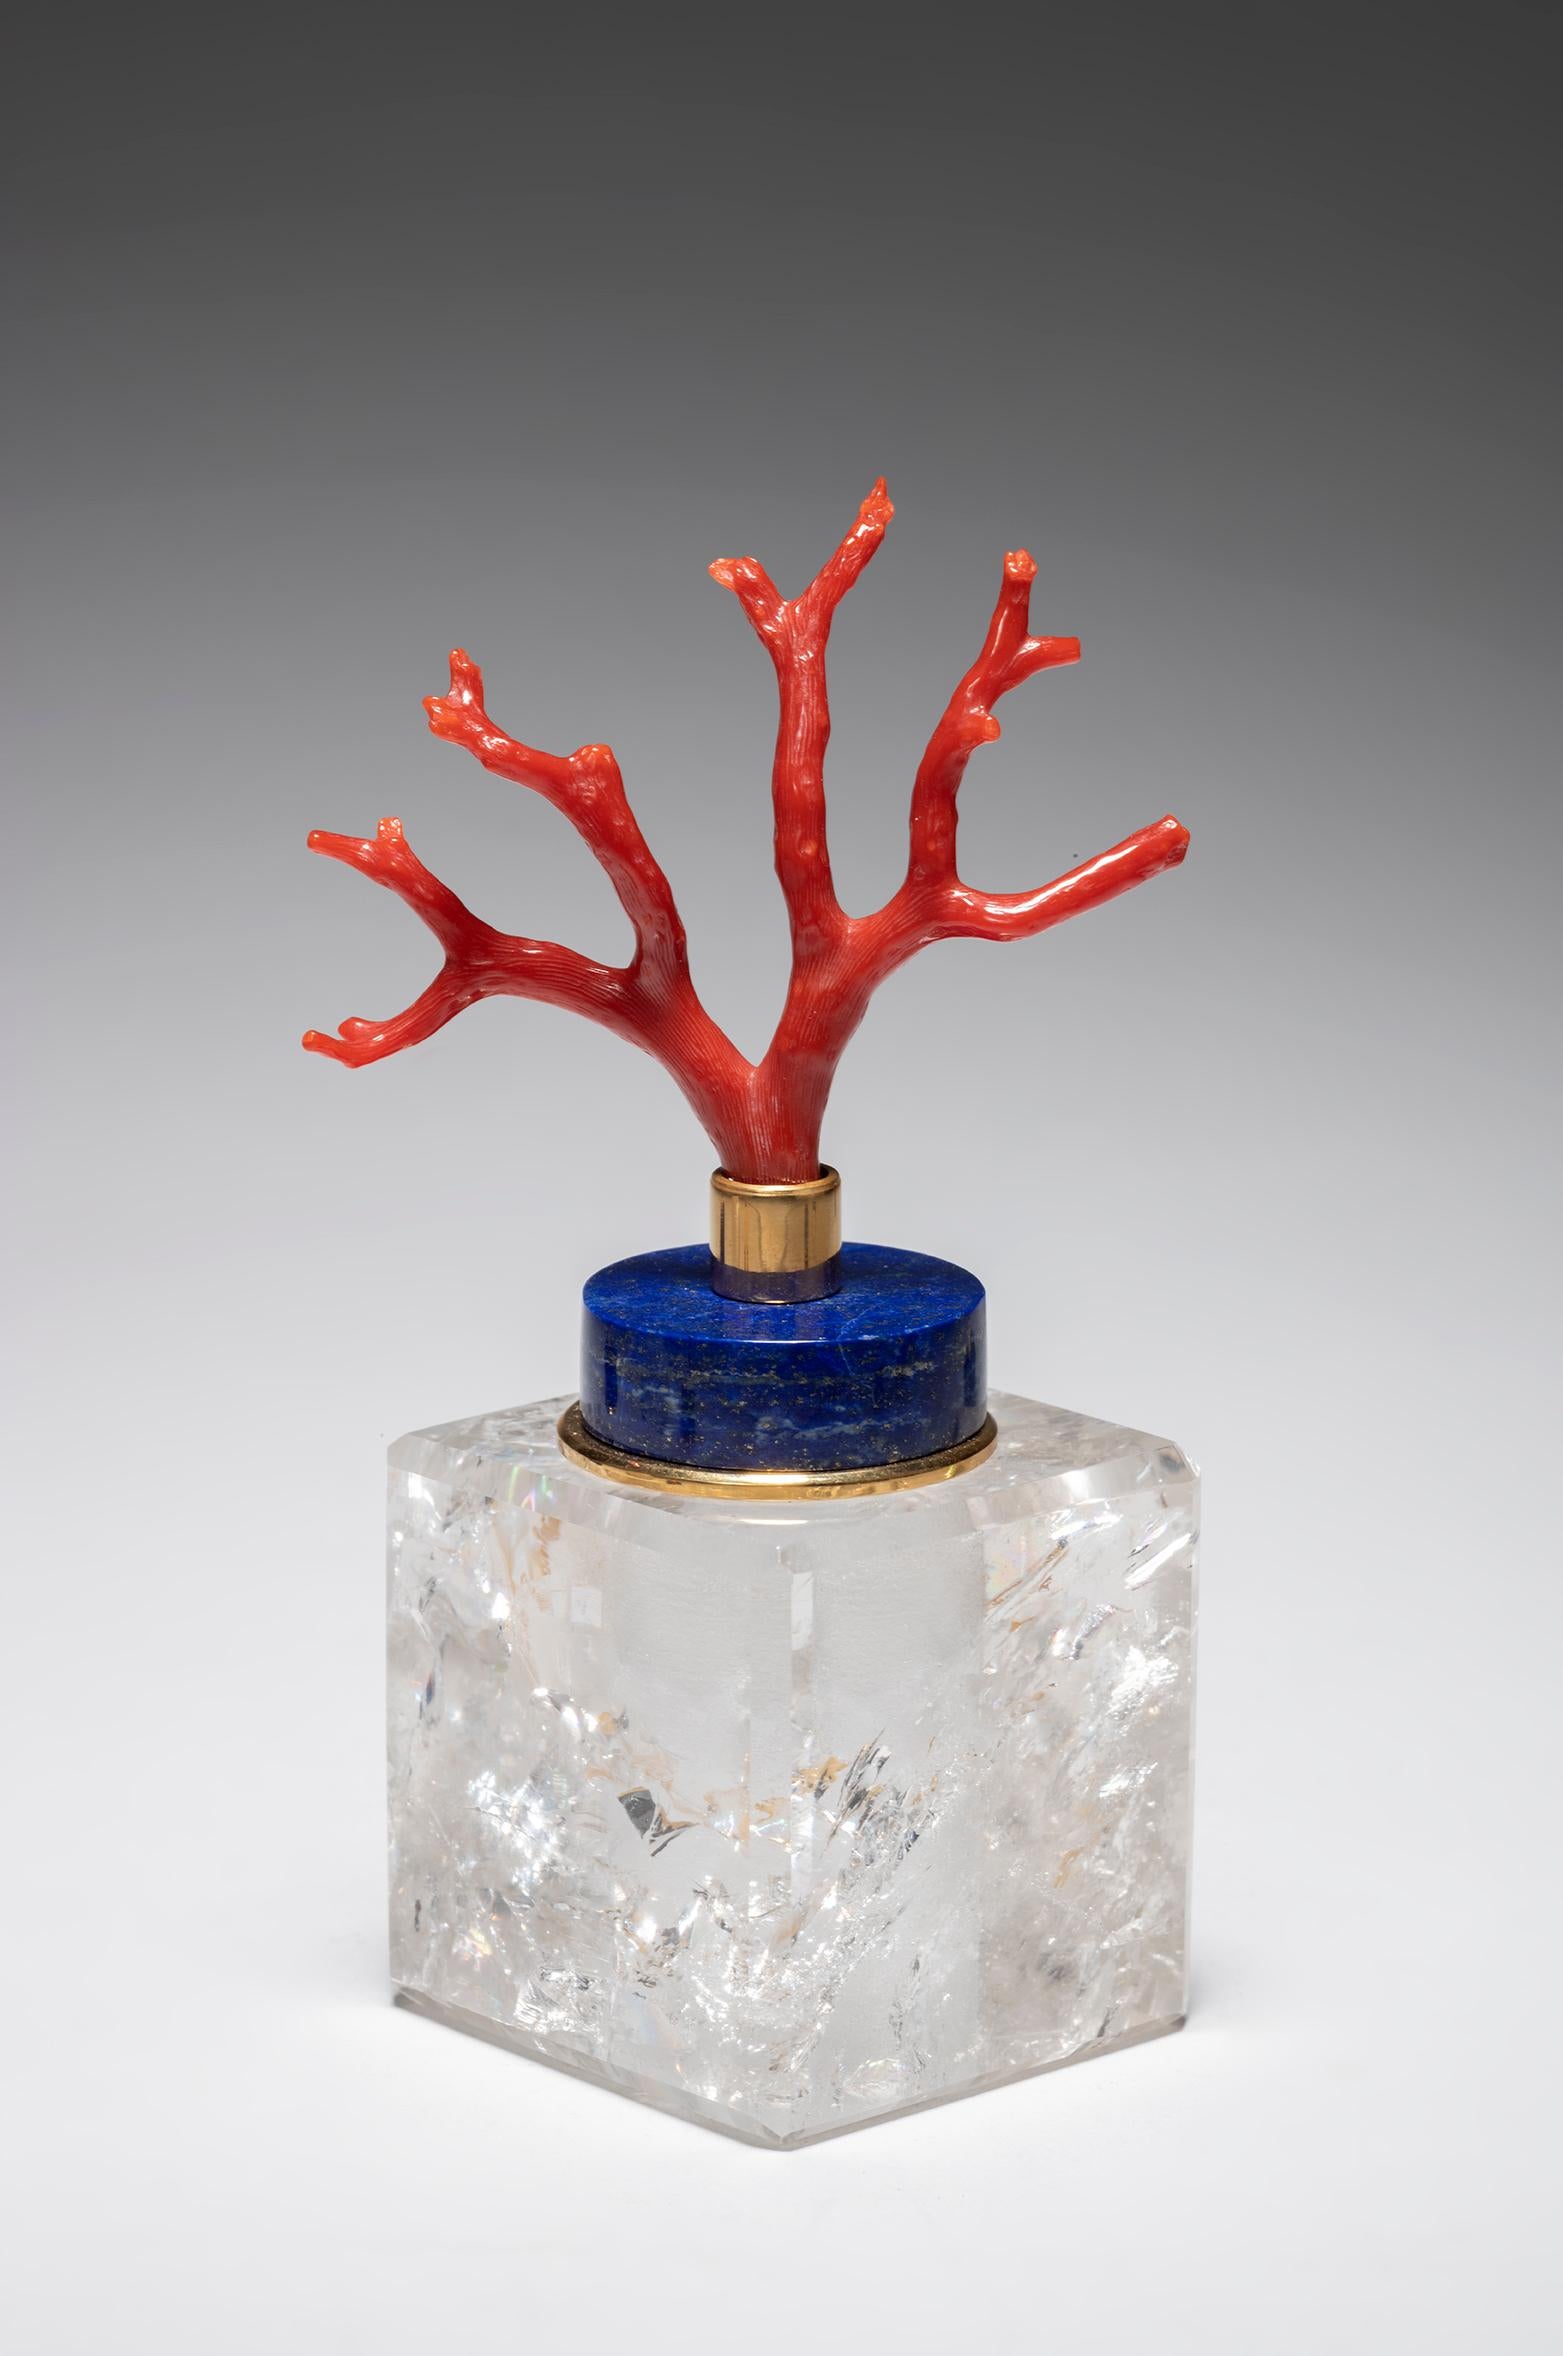 Neoclassical Rock Crystal Base Supporting a Lapis Lazuli Mediterranean Coral Branch